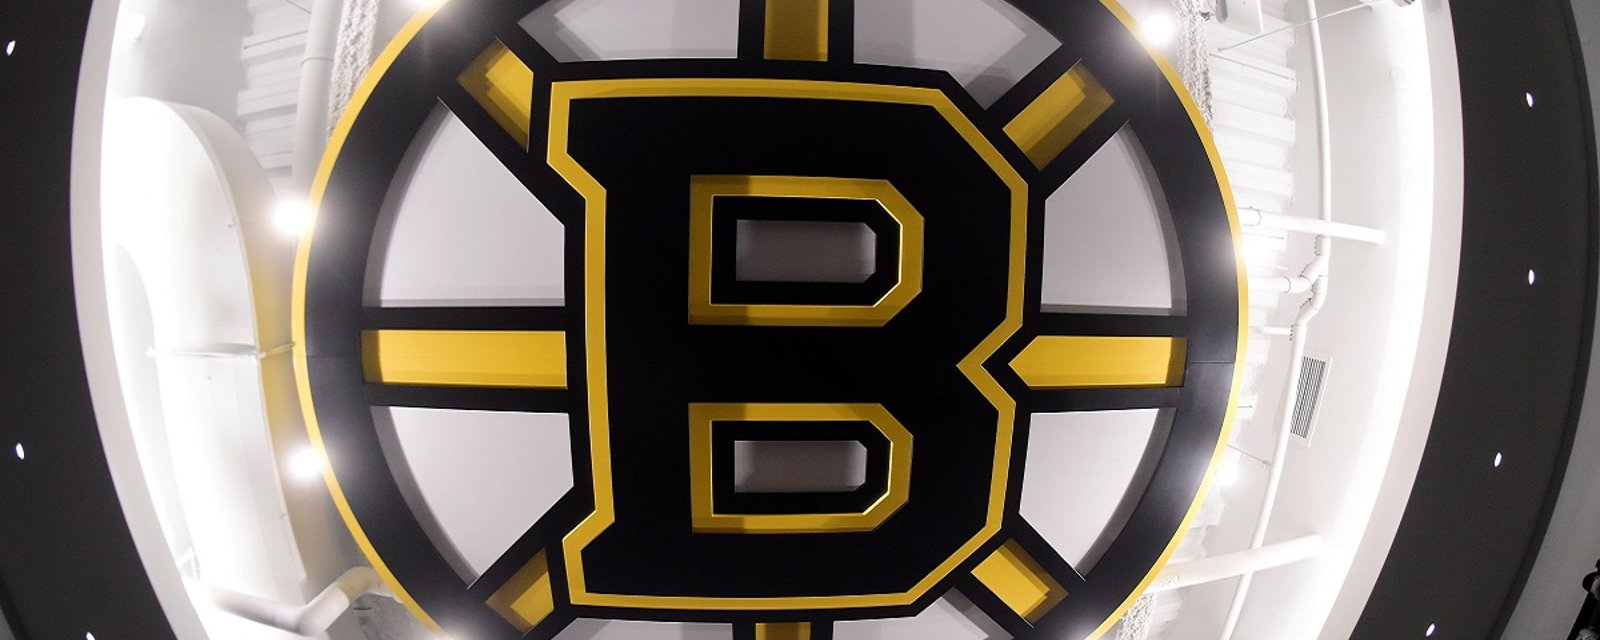 The Bruins unveil a brand new 3rd jersey for this season.